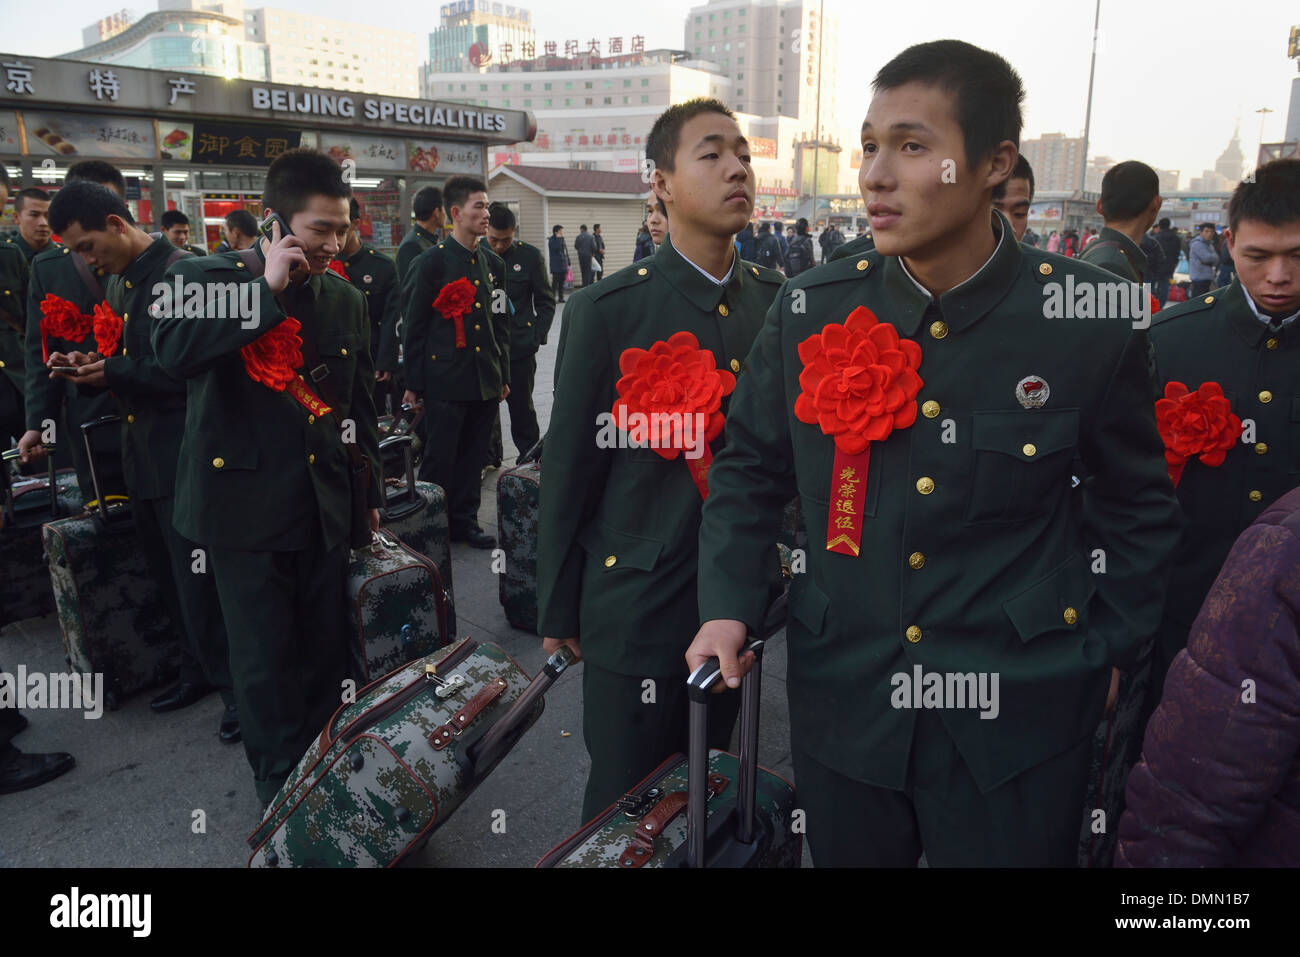 Chinese Demobilized Soldiers Wait To Take The Train At A Railway